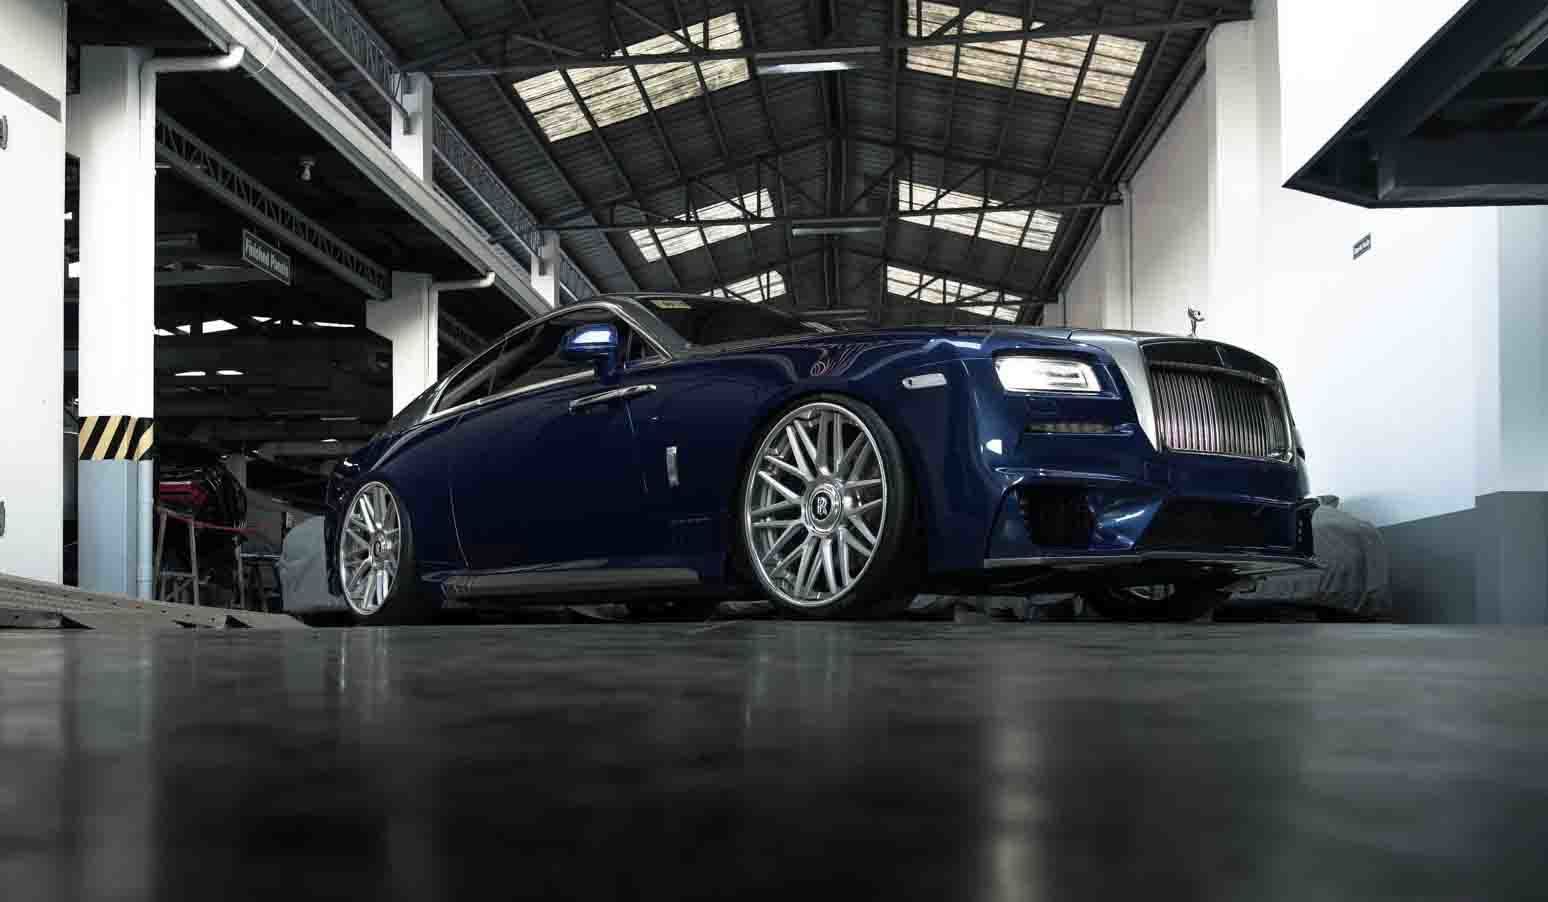 images-products-1-2334-232974622-brixton-forged-rolls-royce-wraith-brixton-forged-cm10-24-inch-brushed-silver-10-1800x1194.jpg